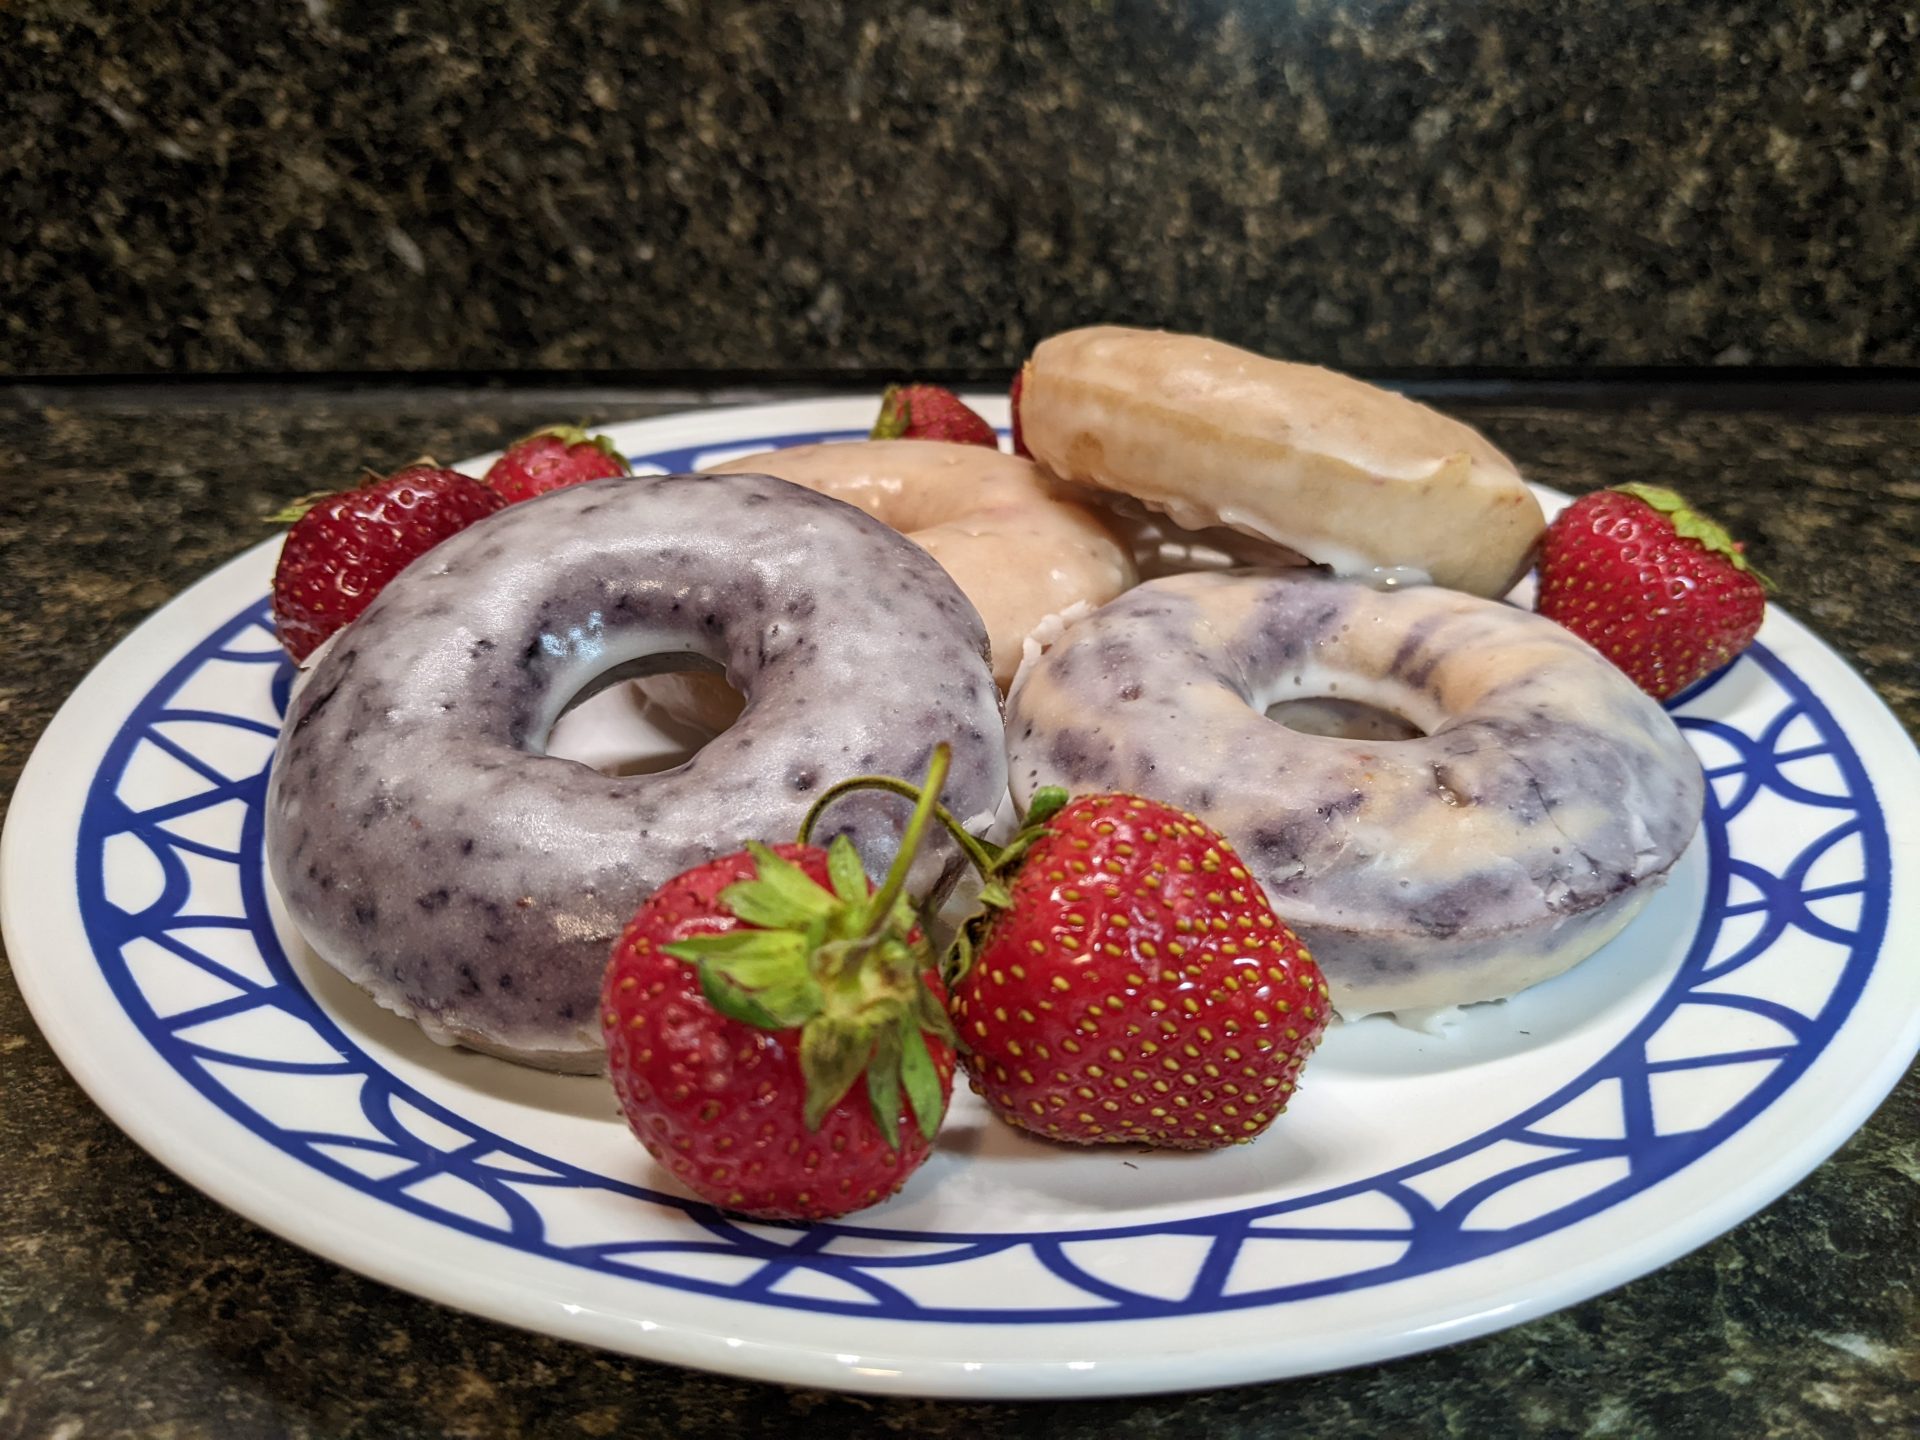 A plate of several berry donuts, surrounded by strawberries.